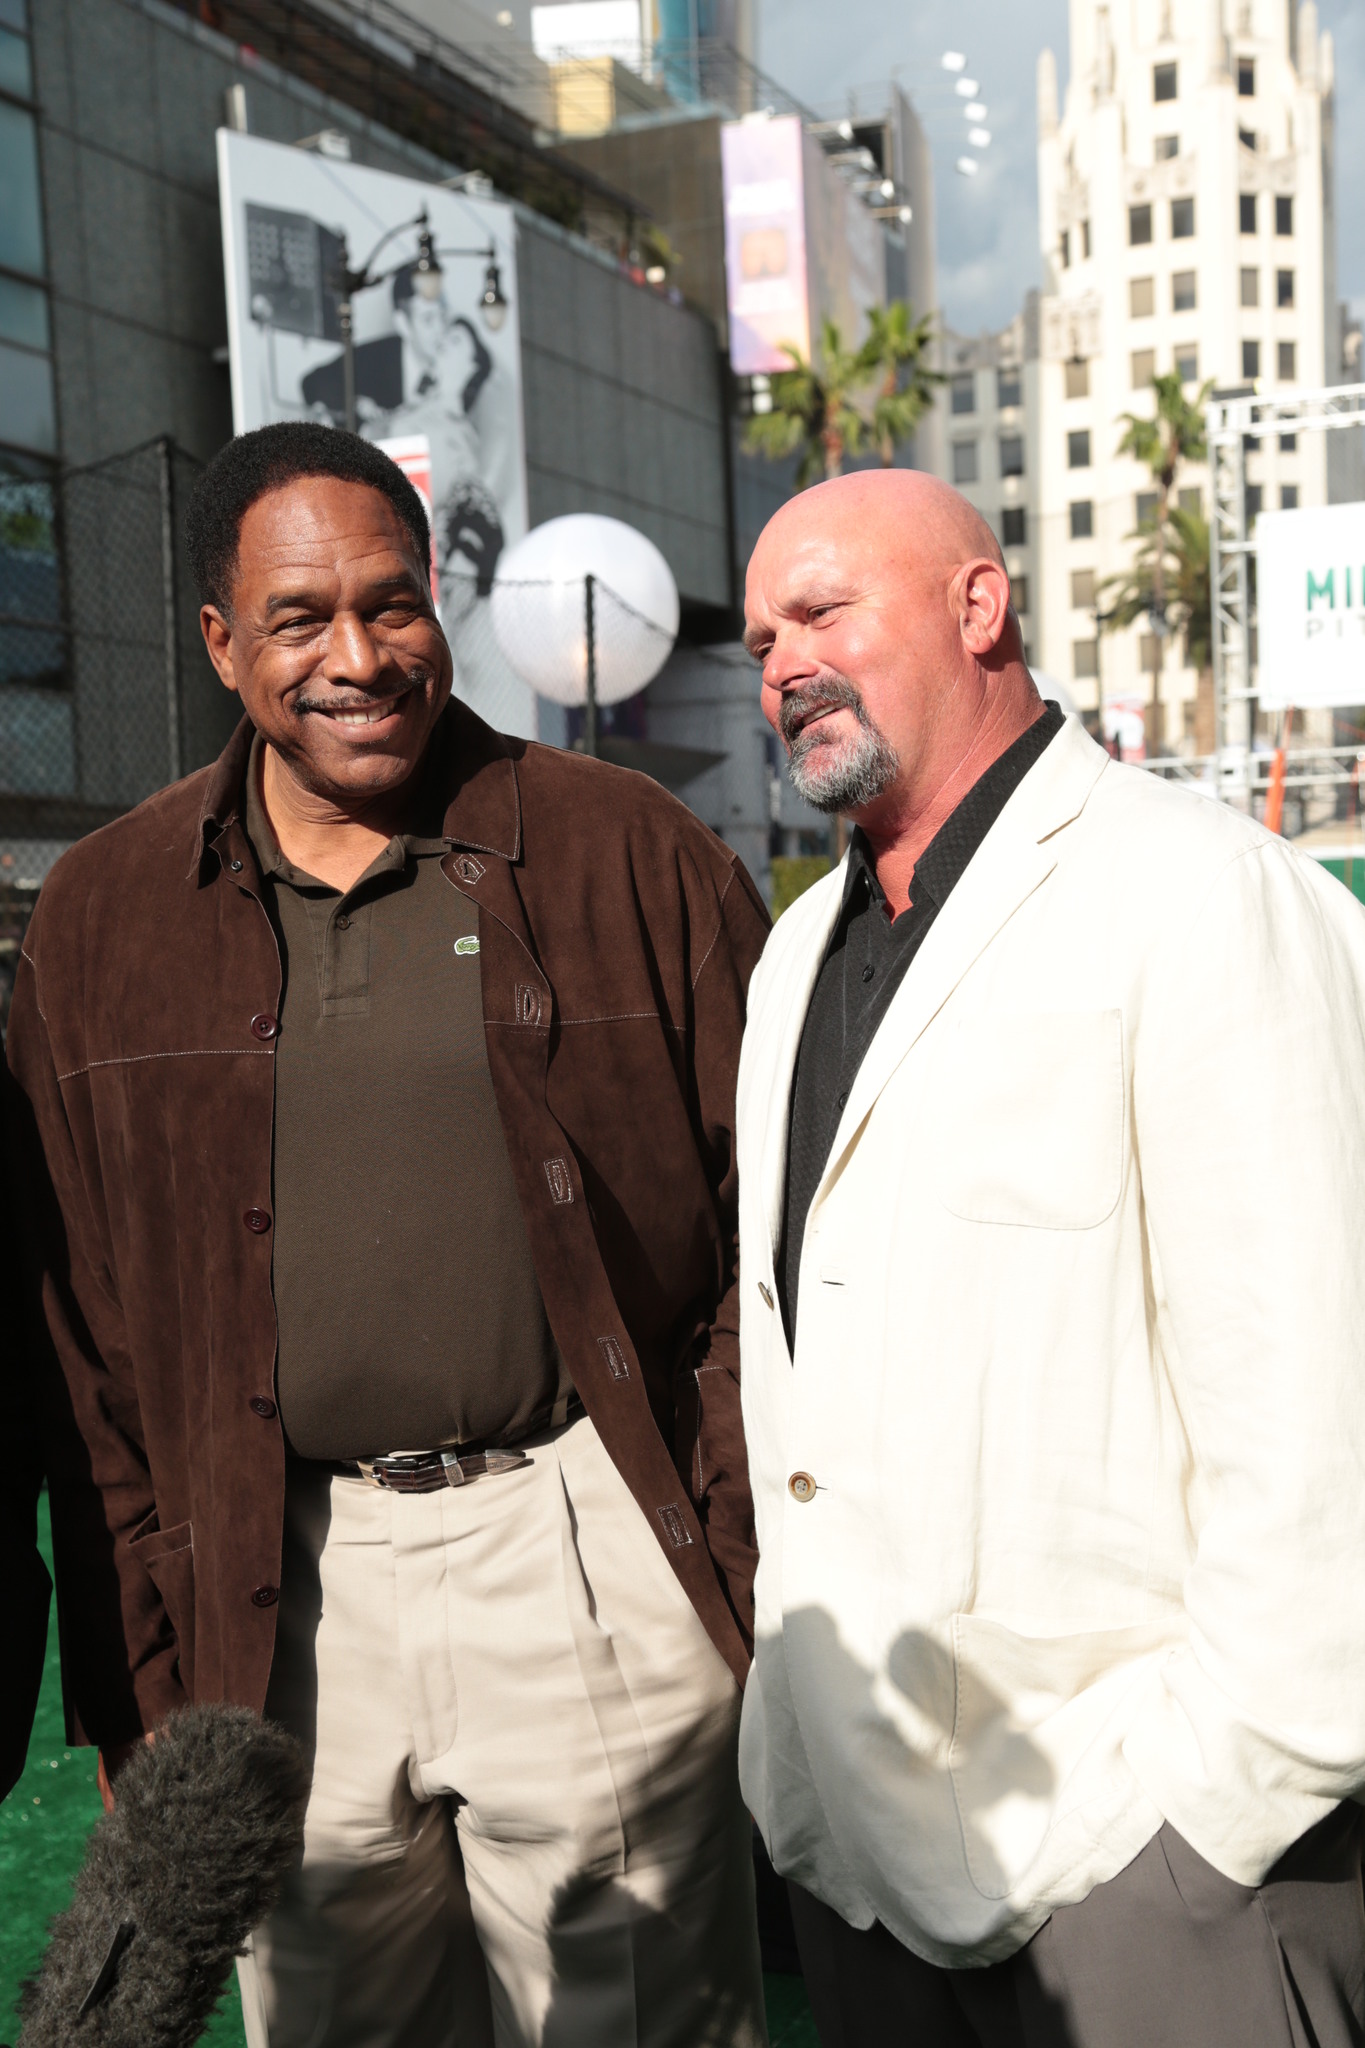 David Wells and Dave Winfield at event of Million Dollar Arm (2014)